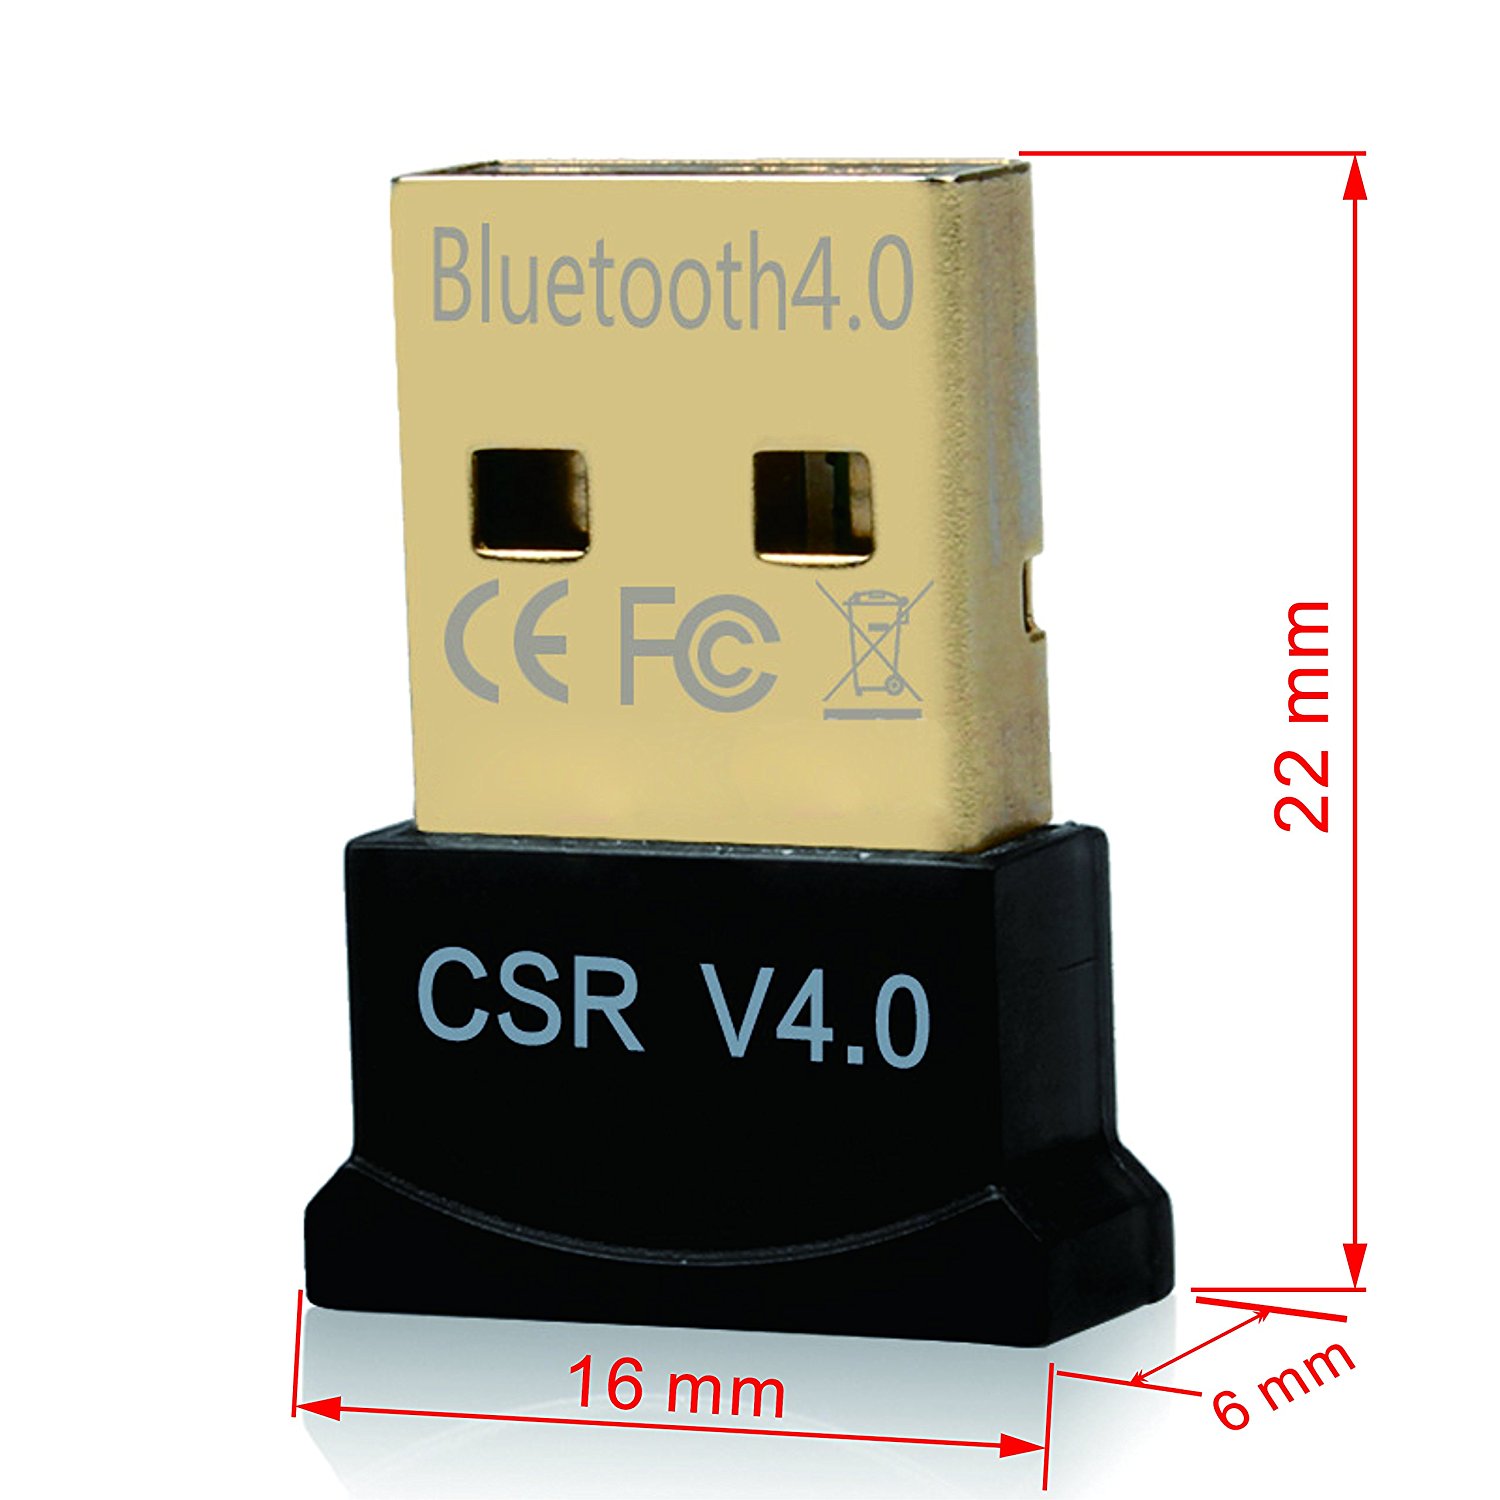 Bluetooth 4.0 USB Adapter Gold Plated Micro Dongle 33ft/10m Compatible with Windows 10,8.1/8,7,Vista, XP, 32/64 Bit for Desktop , Laptop, computers - image 3 of 8